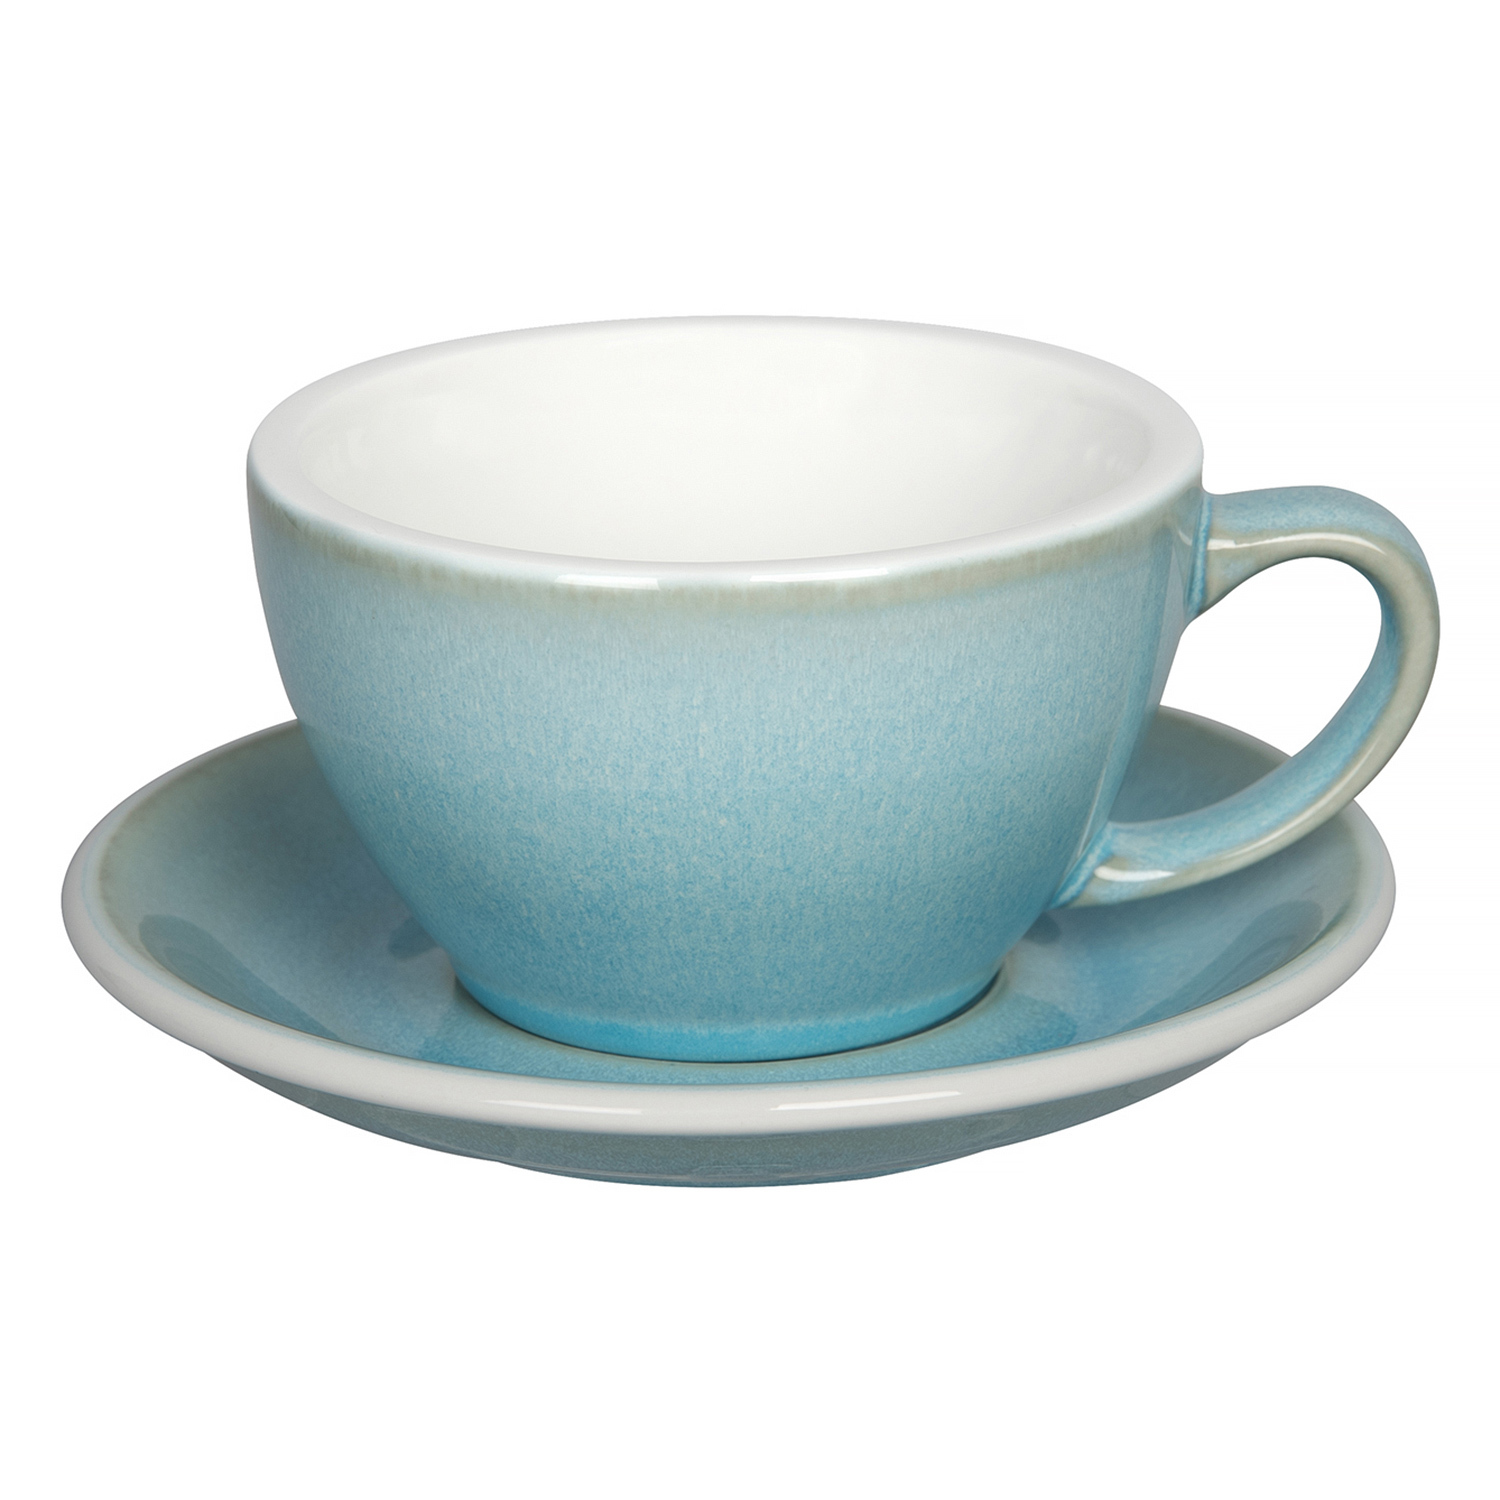 Loveramics Egg - Cafe Latte 300 ml Cup and Saucer  - Ice Blue